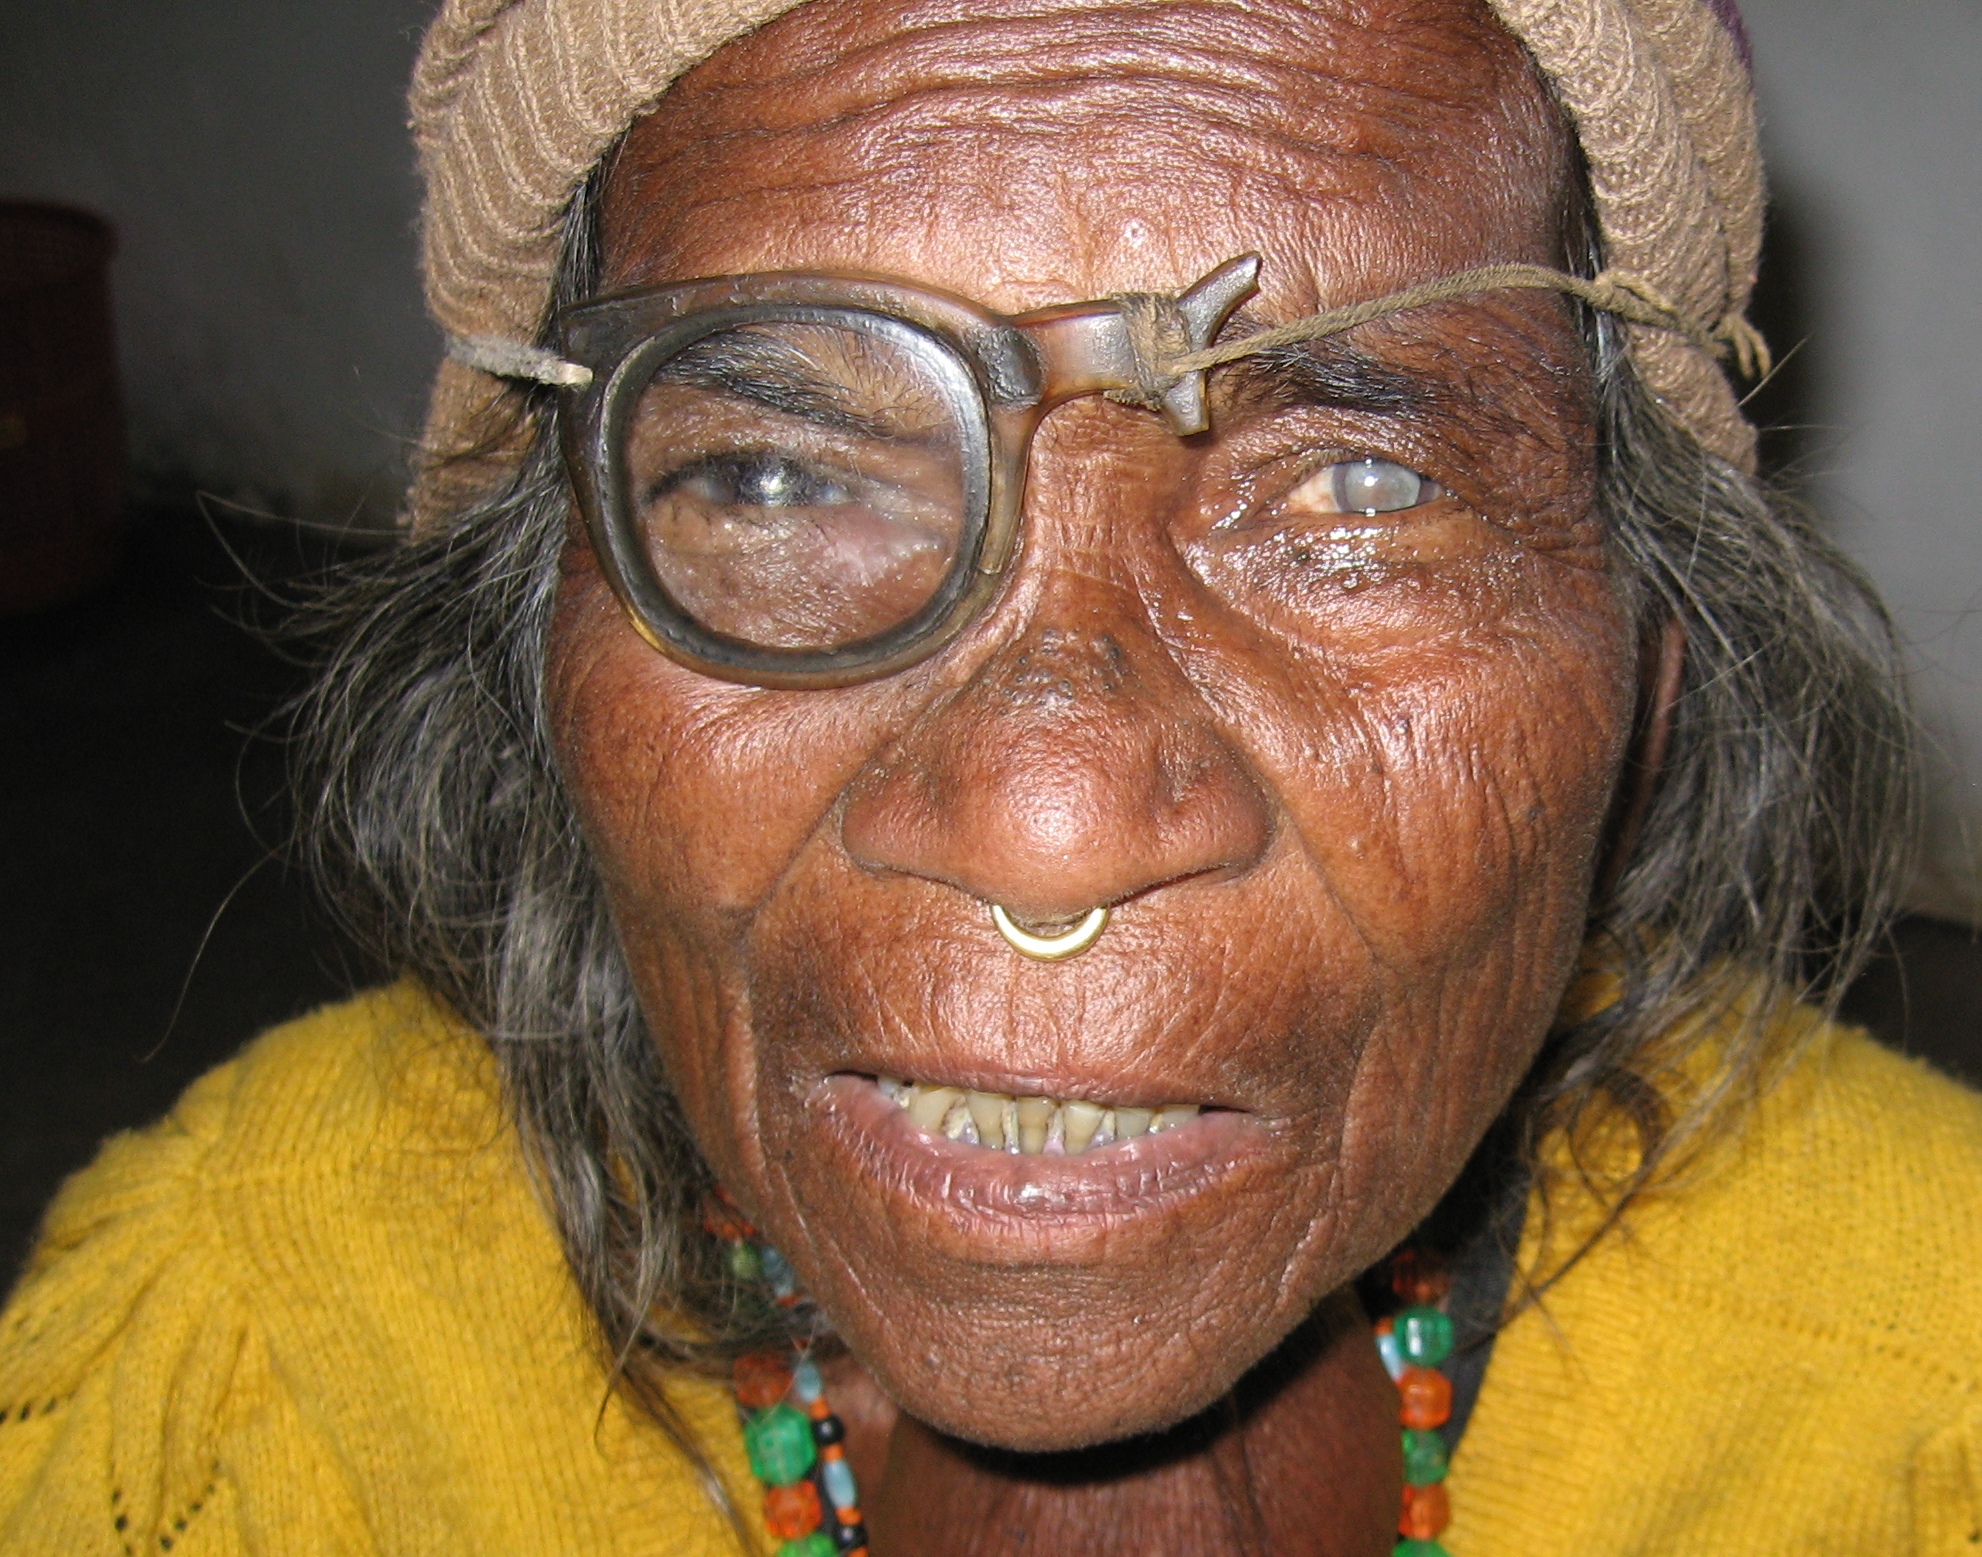 This Nepali woman was seen at a recent Seva eye camp in Doti. Notice her broken glasses and mature cataract.